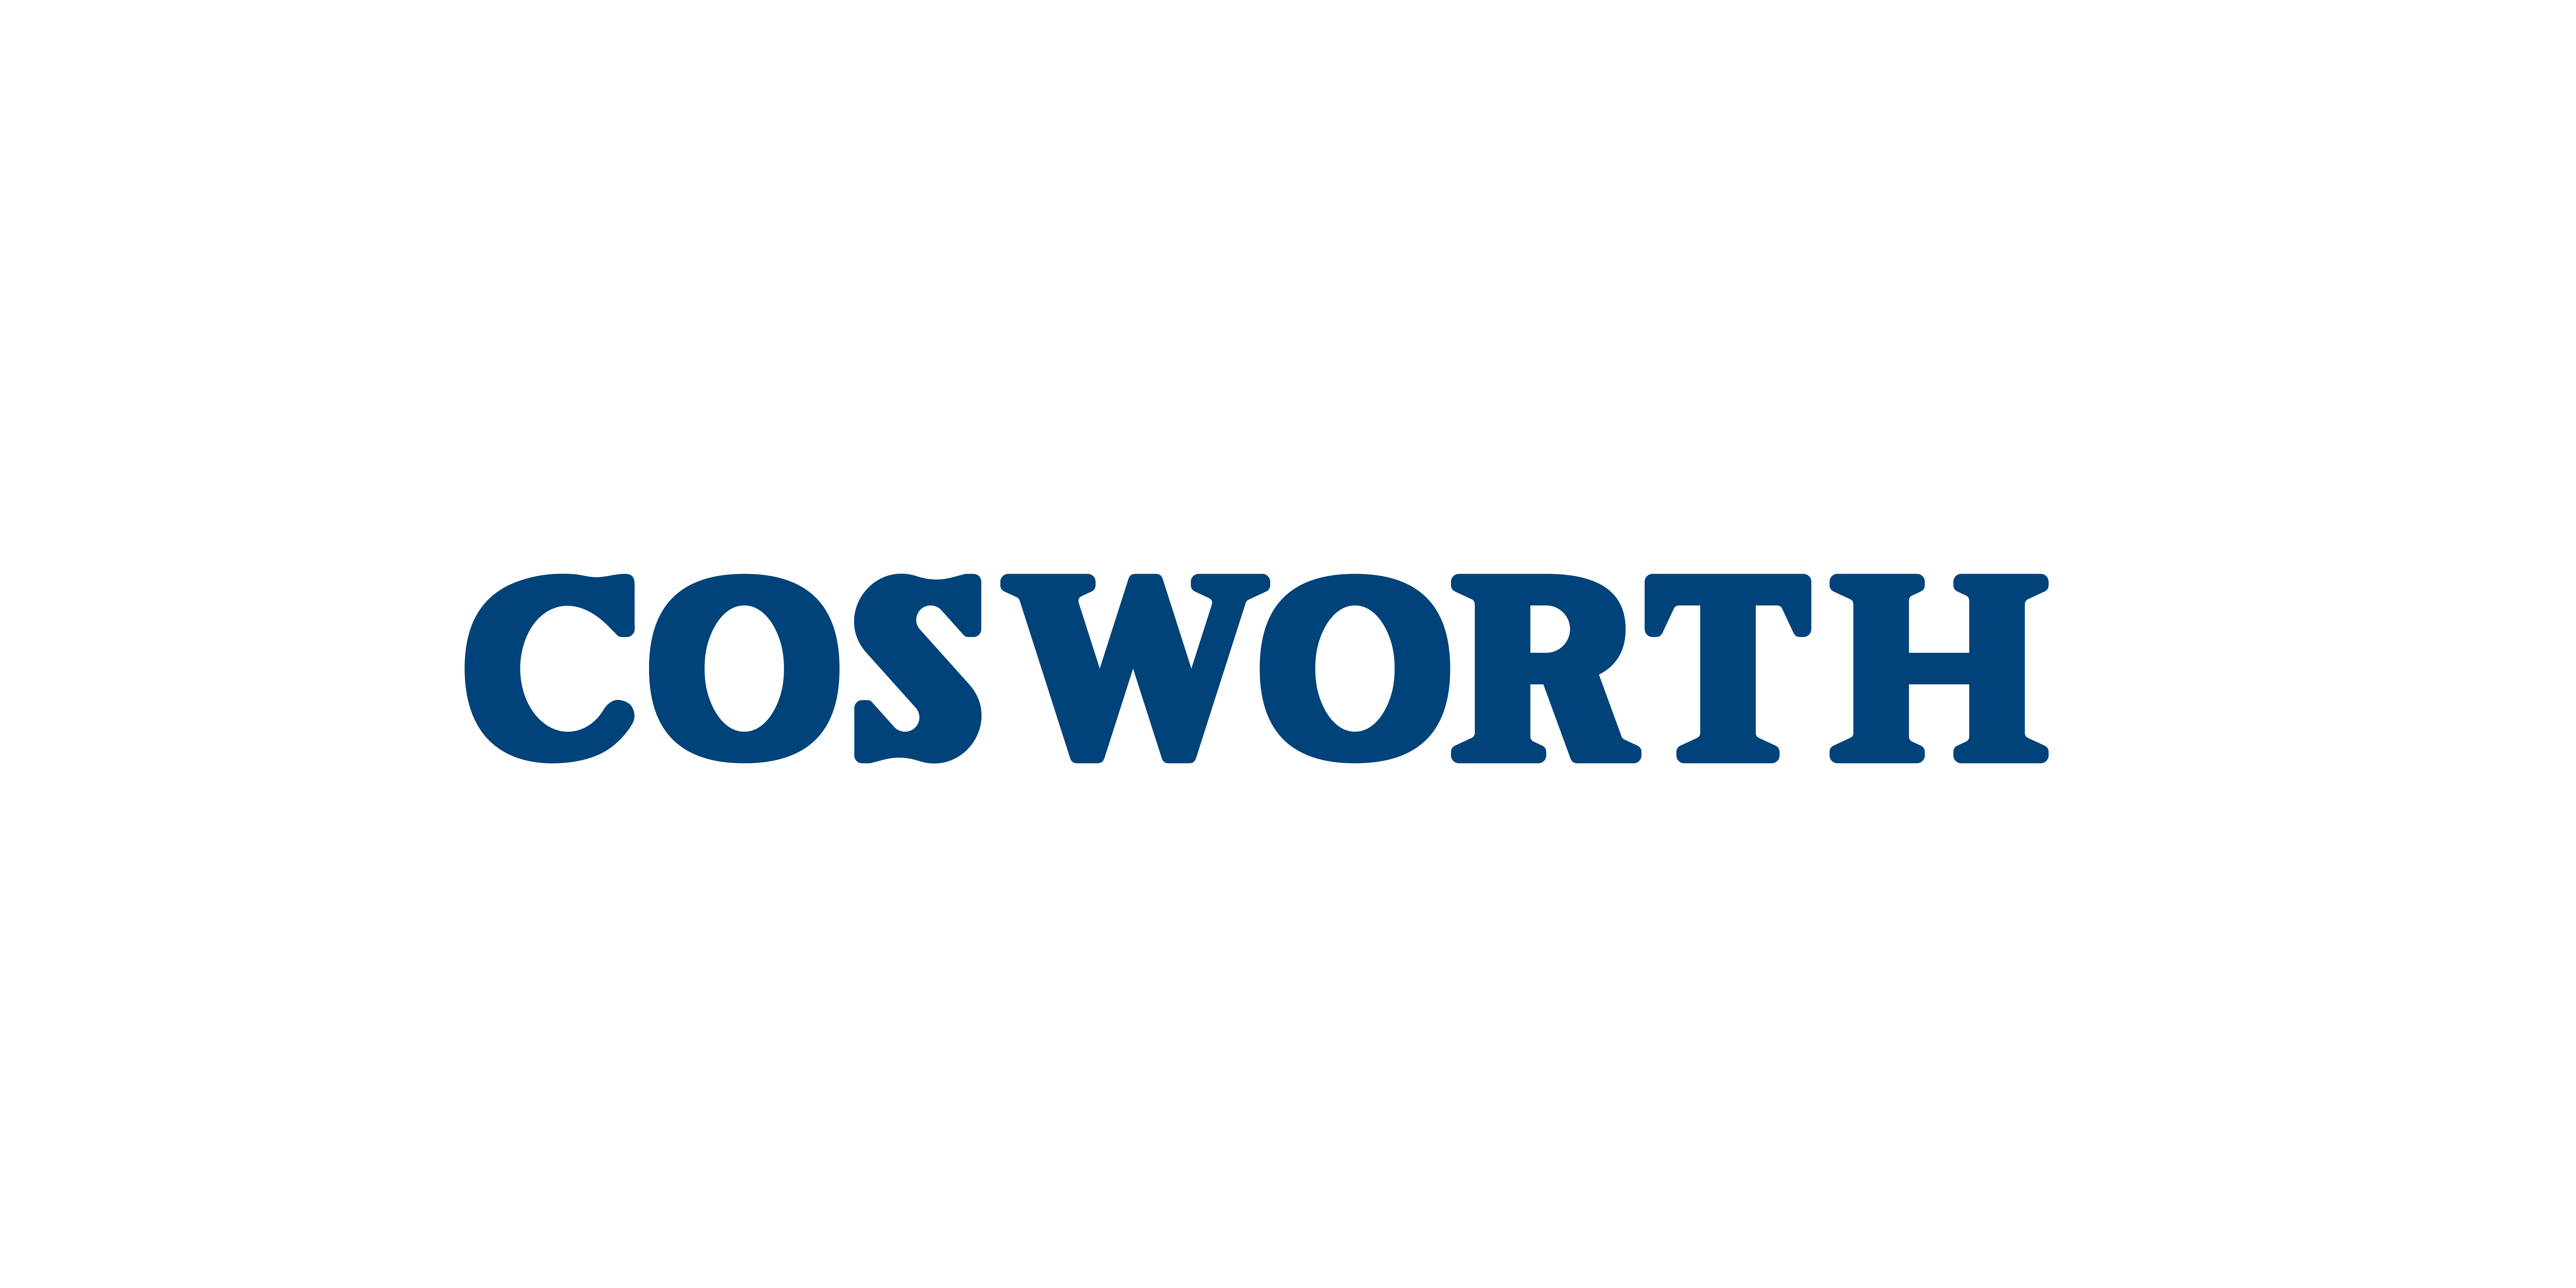 Cosworth Group Holdings Ltd